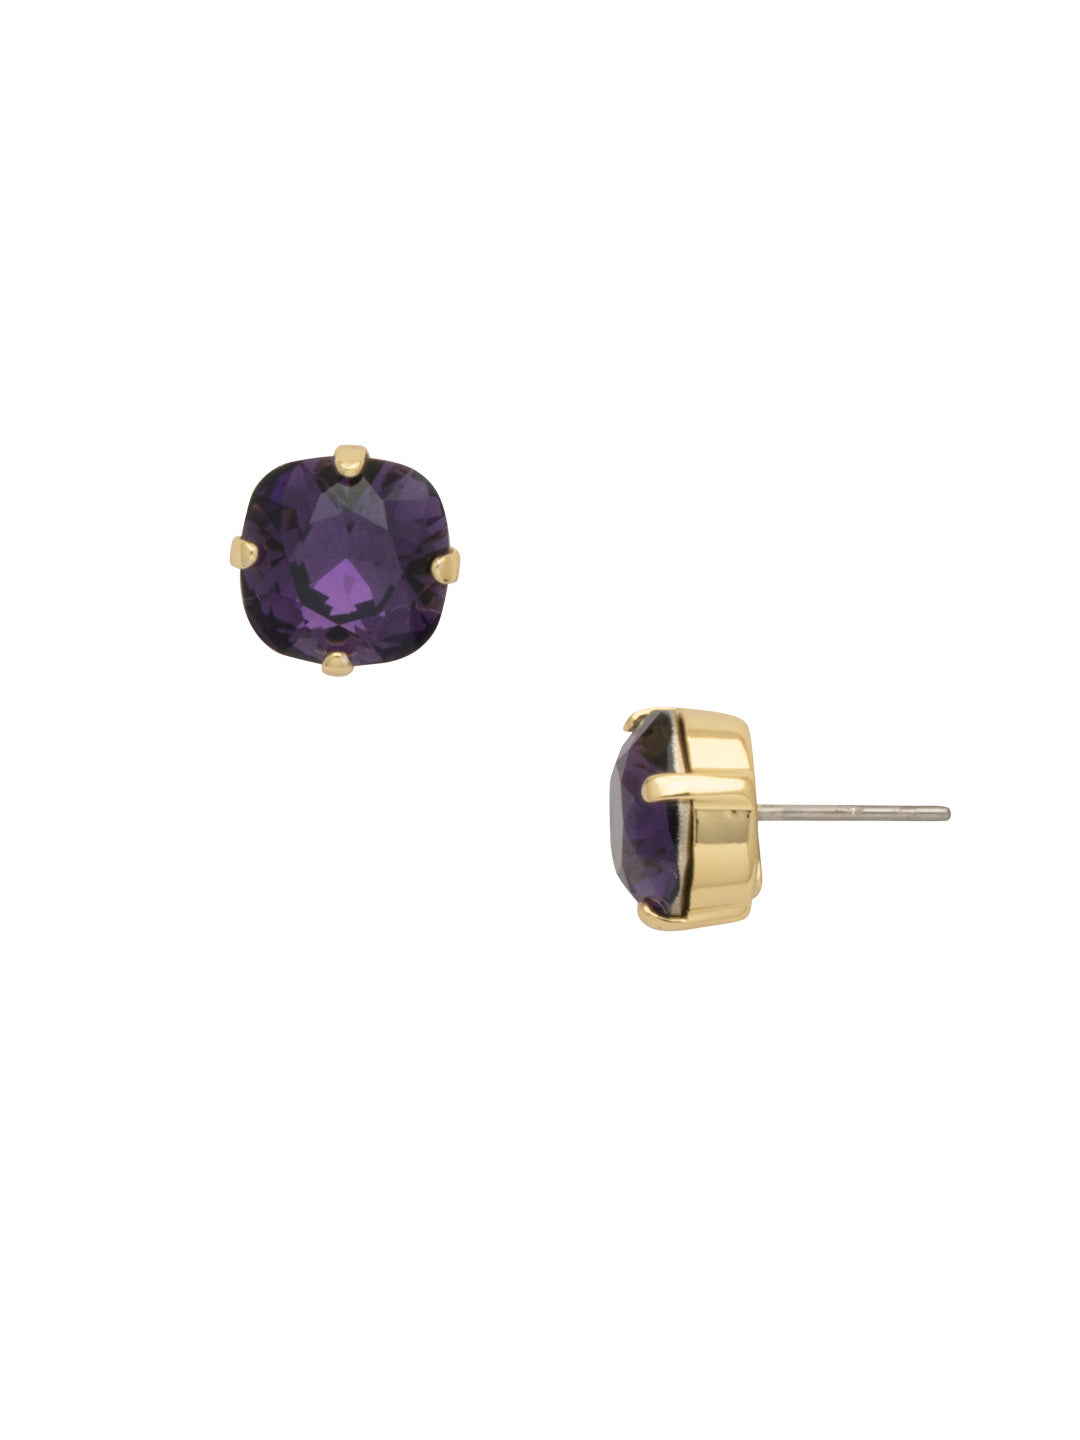 Halcyon Stud Earrings - EDH25BGMDG - <p>A beautiful, luminous cushion-cut crystal in a classic four-pronged setting that's ideal for everyday wear. From Sorrelli's Mardi Gras collection in our Bright Gold-tone finish.</p>